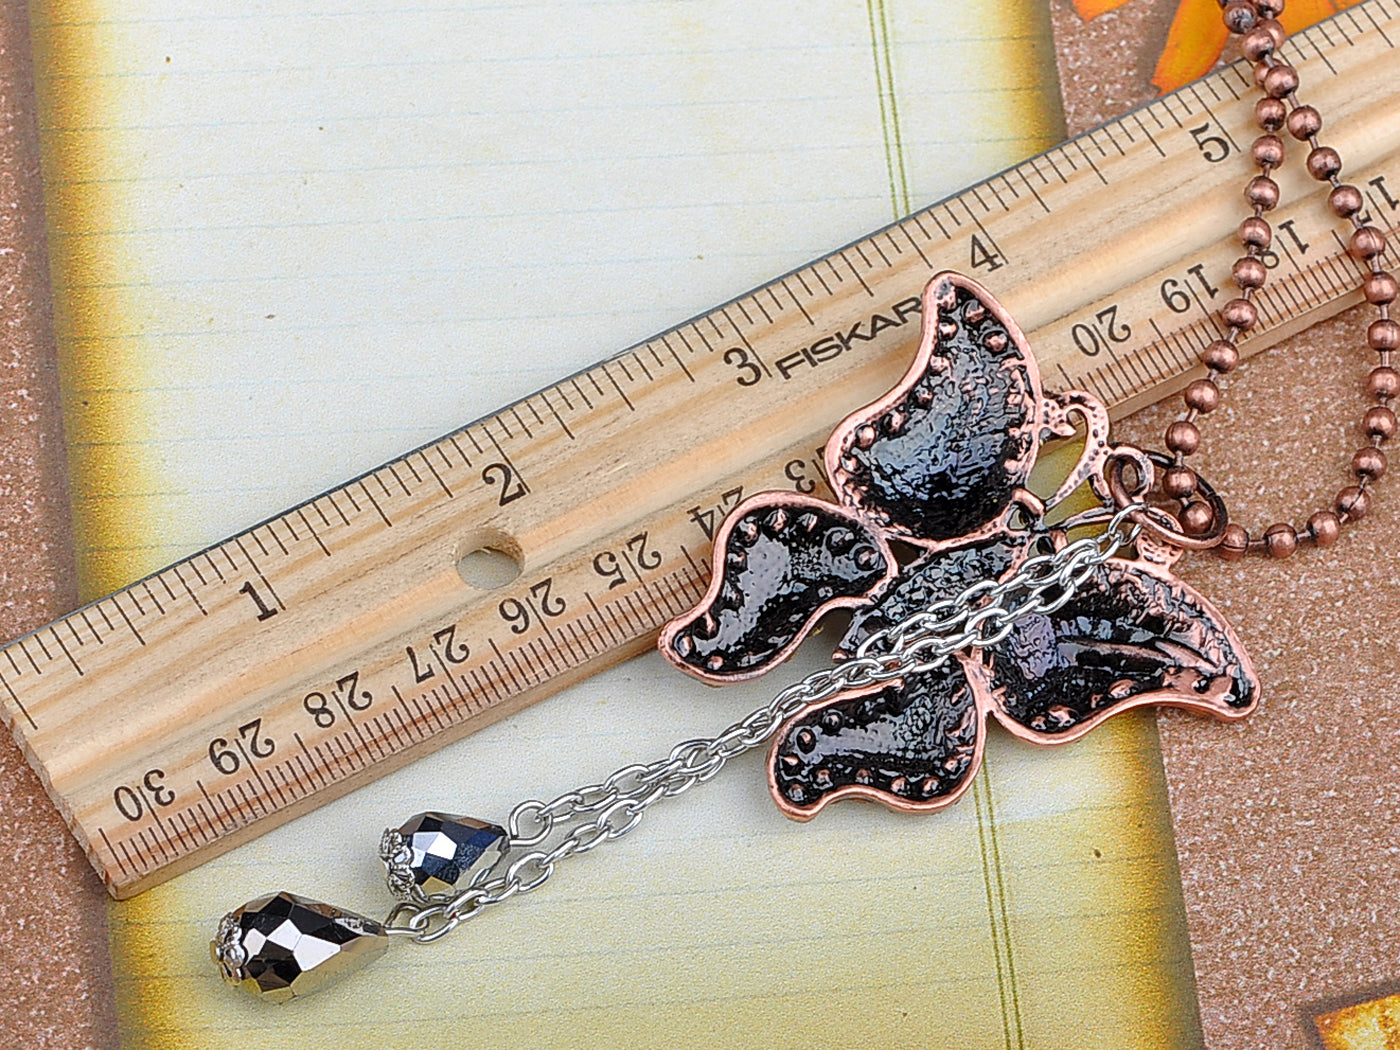 Painted Enamel Pink Butterfly Pendant Necklace